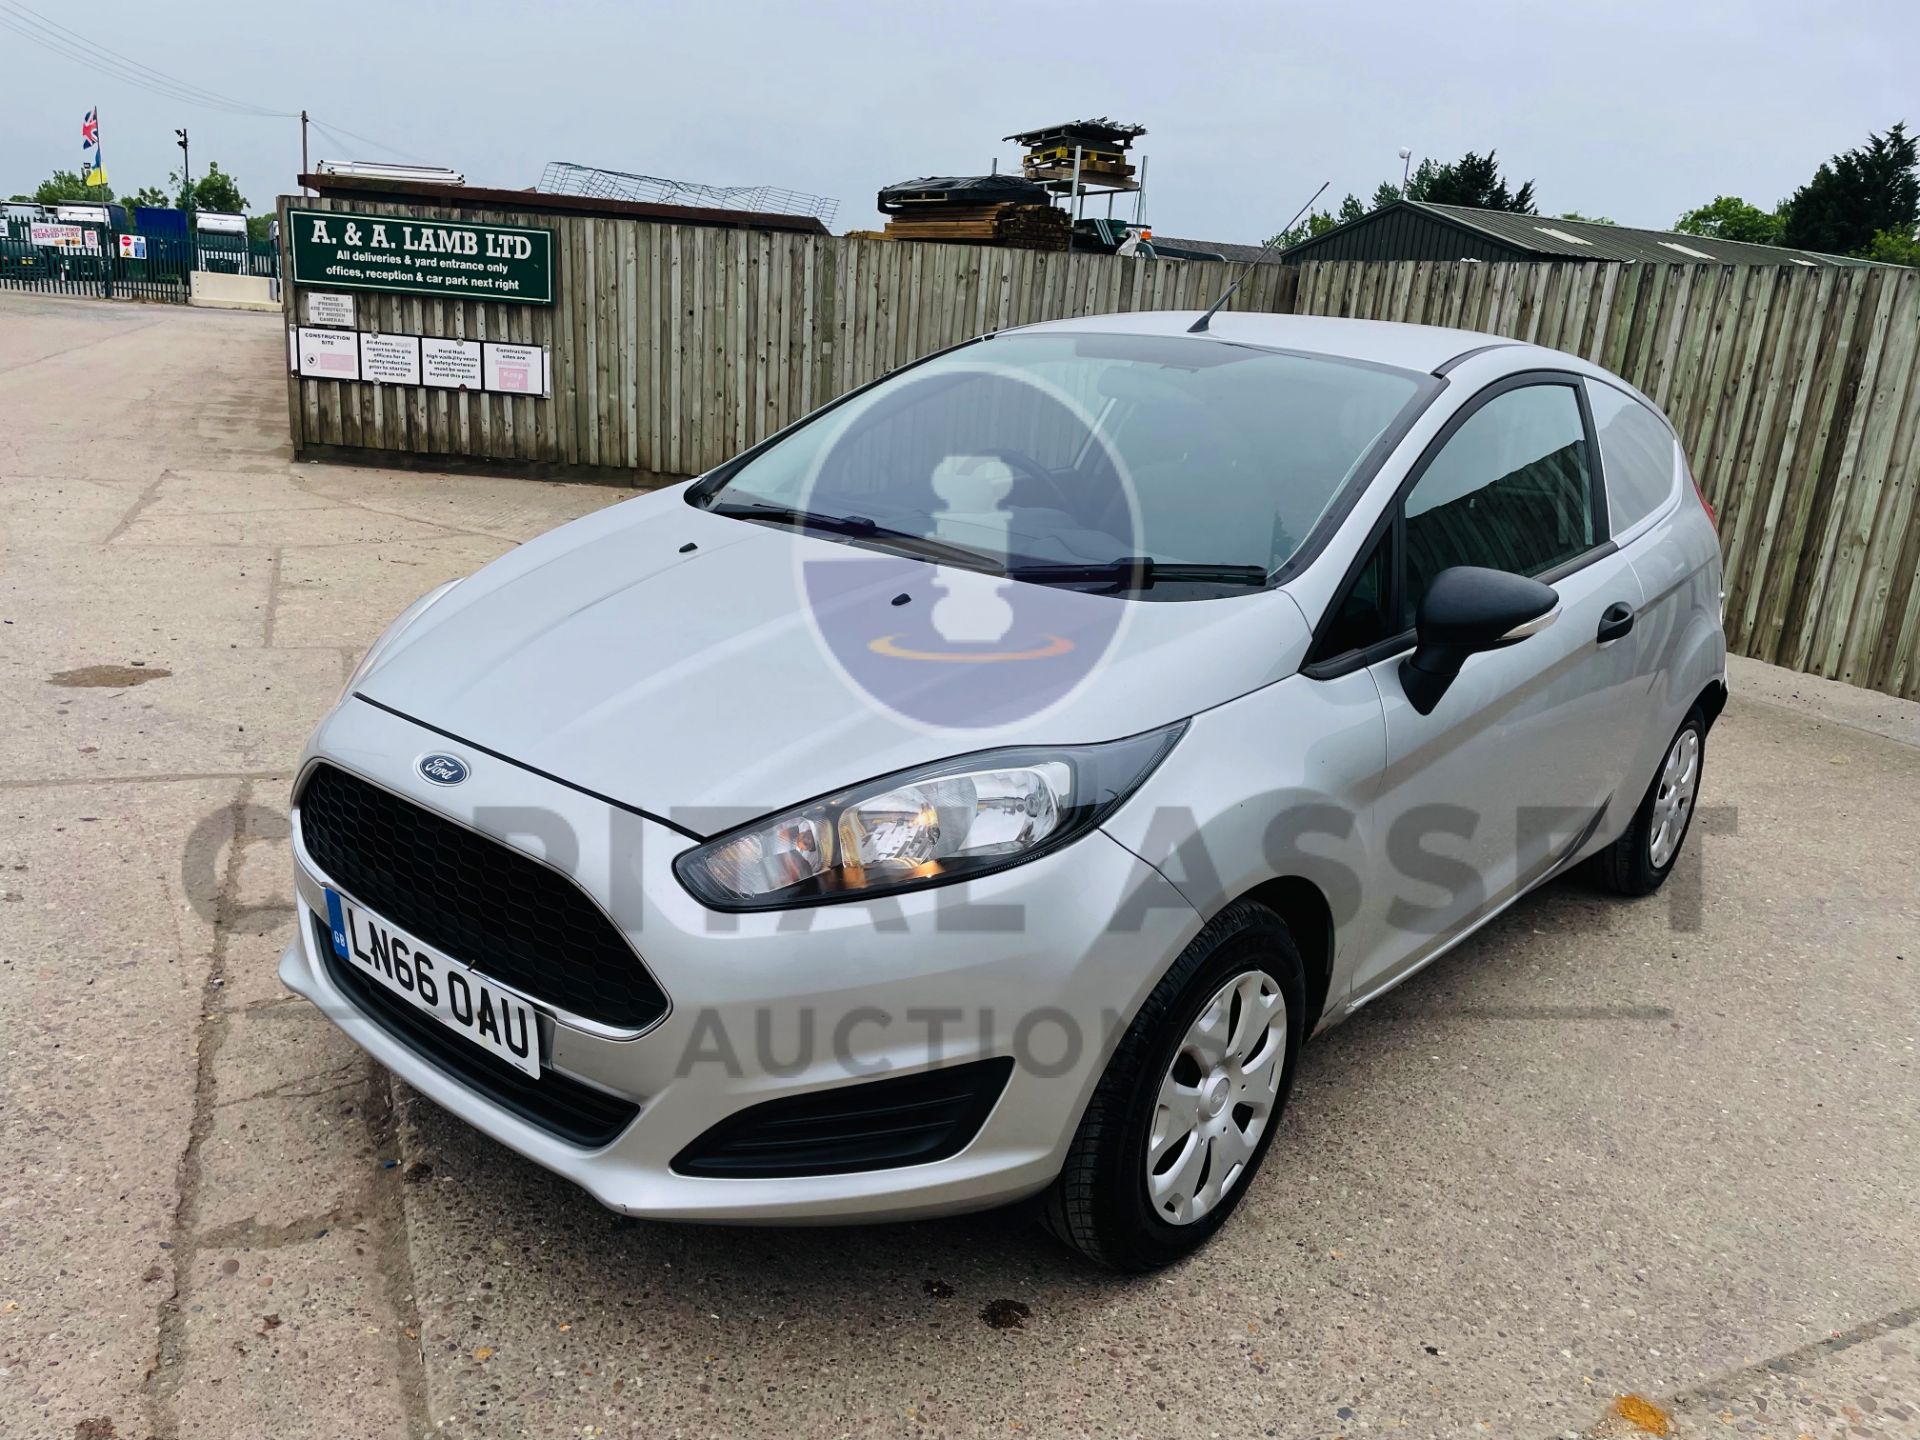 FORD FIESTA *LCV - PANEL VAN* (2017 - EURO 6) 1.5 TDCI - AUTO STOP/START (1 OWNER) *AIR CON* - Image 6 of 38